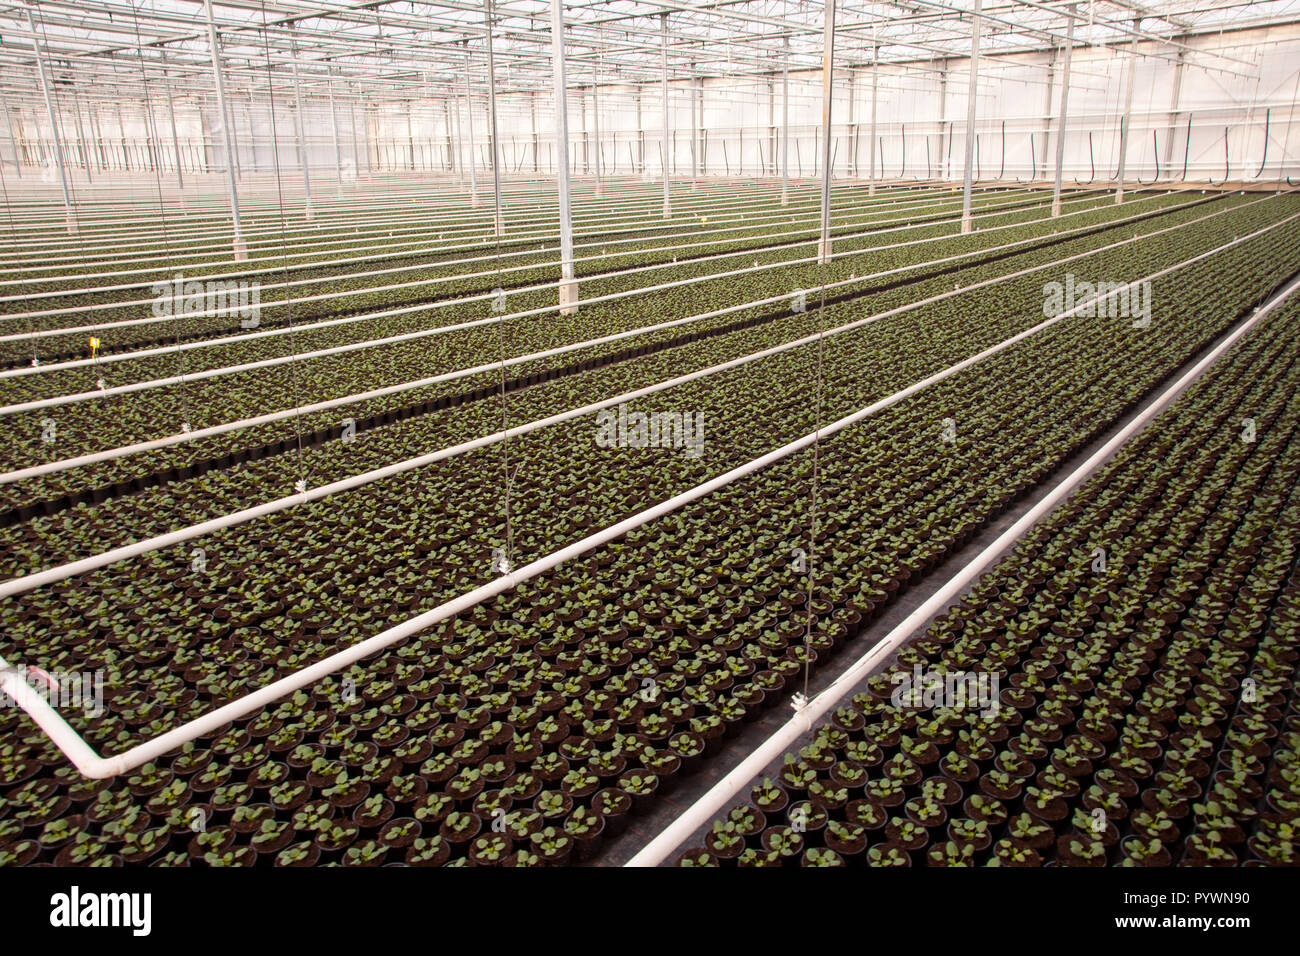 Crops in a large scale Nursery Greenhouse in the Netherlands Stock Photo